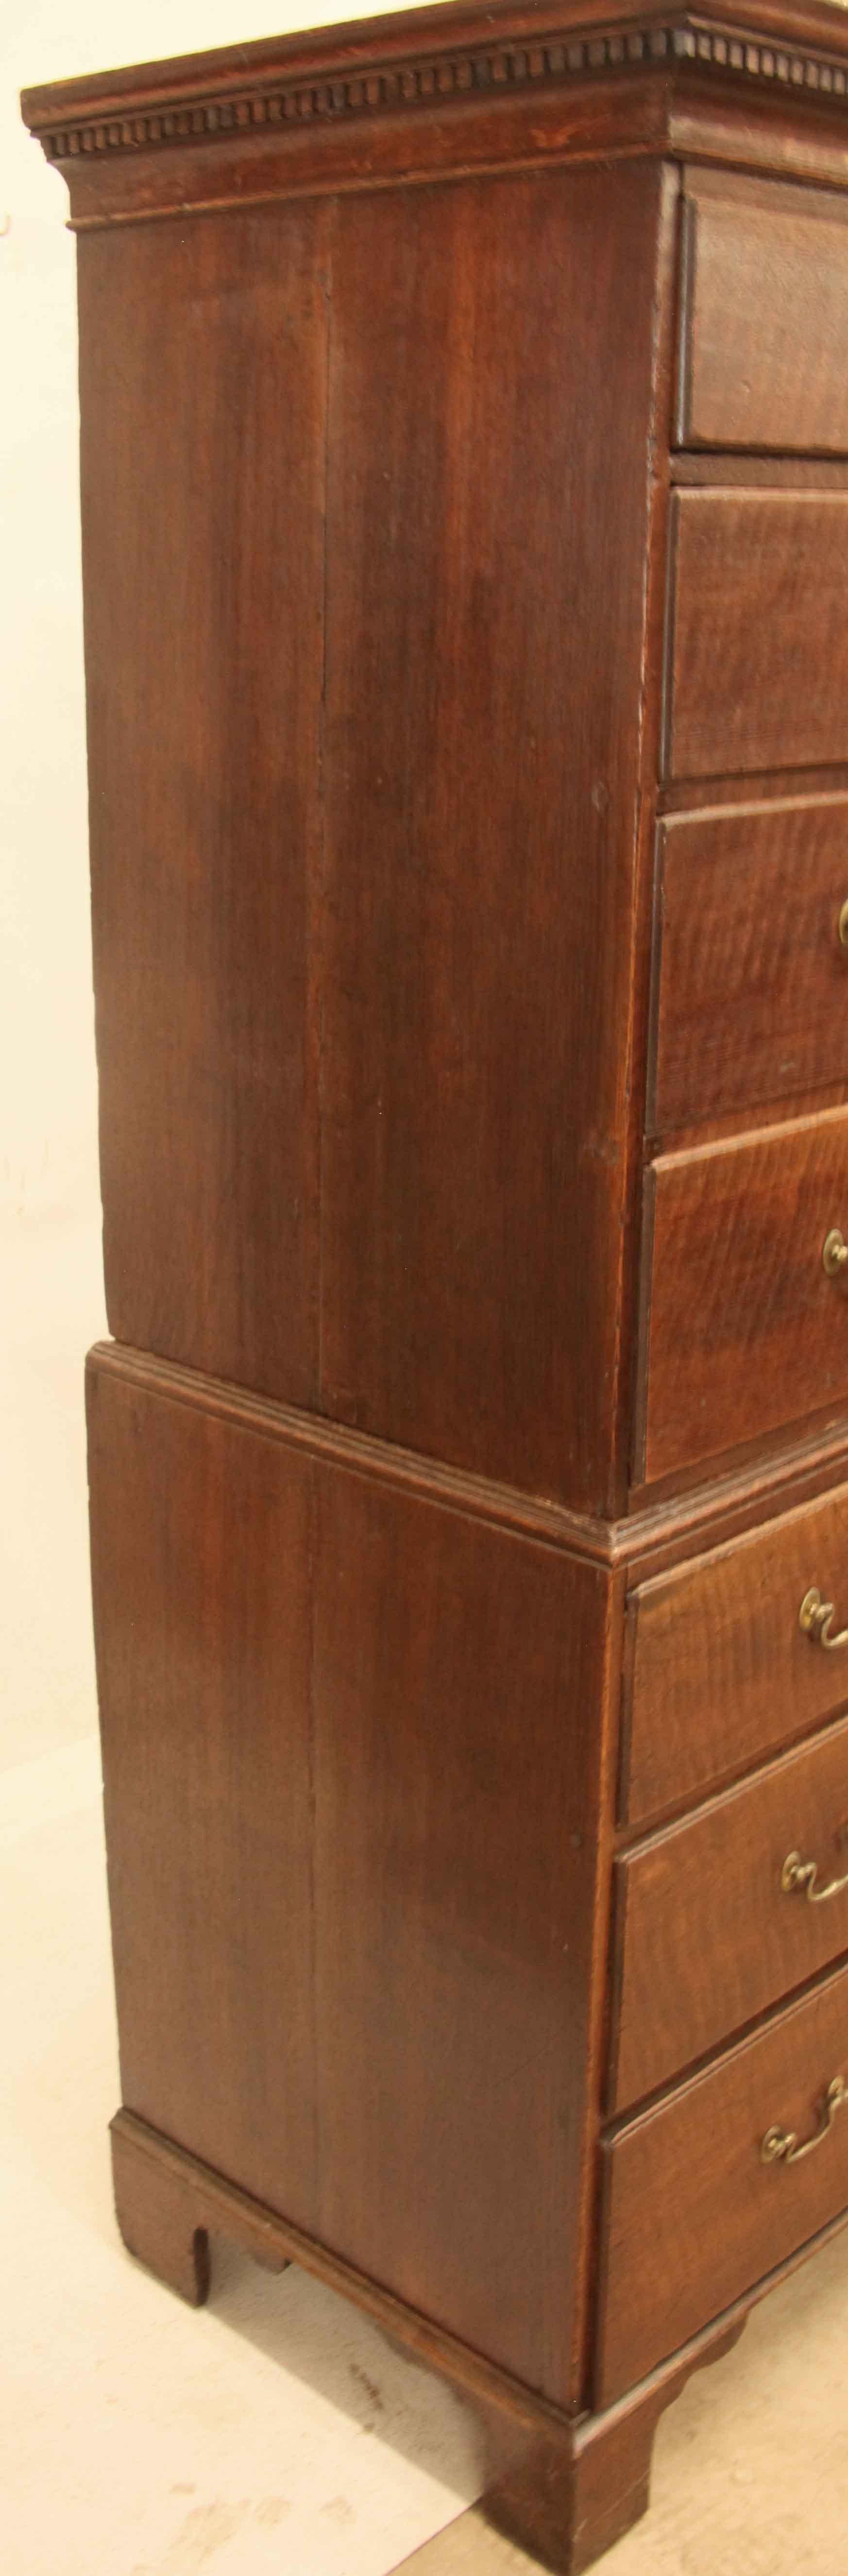 English oak chest on chest,  the cornice features dentil molding; the drawers have a pleasant faded color with molded edges (not overlapping) and retain their original swan neck brass pulls with oval back plates, the secondary wood is pine.  This